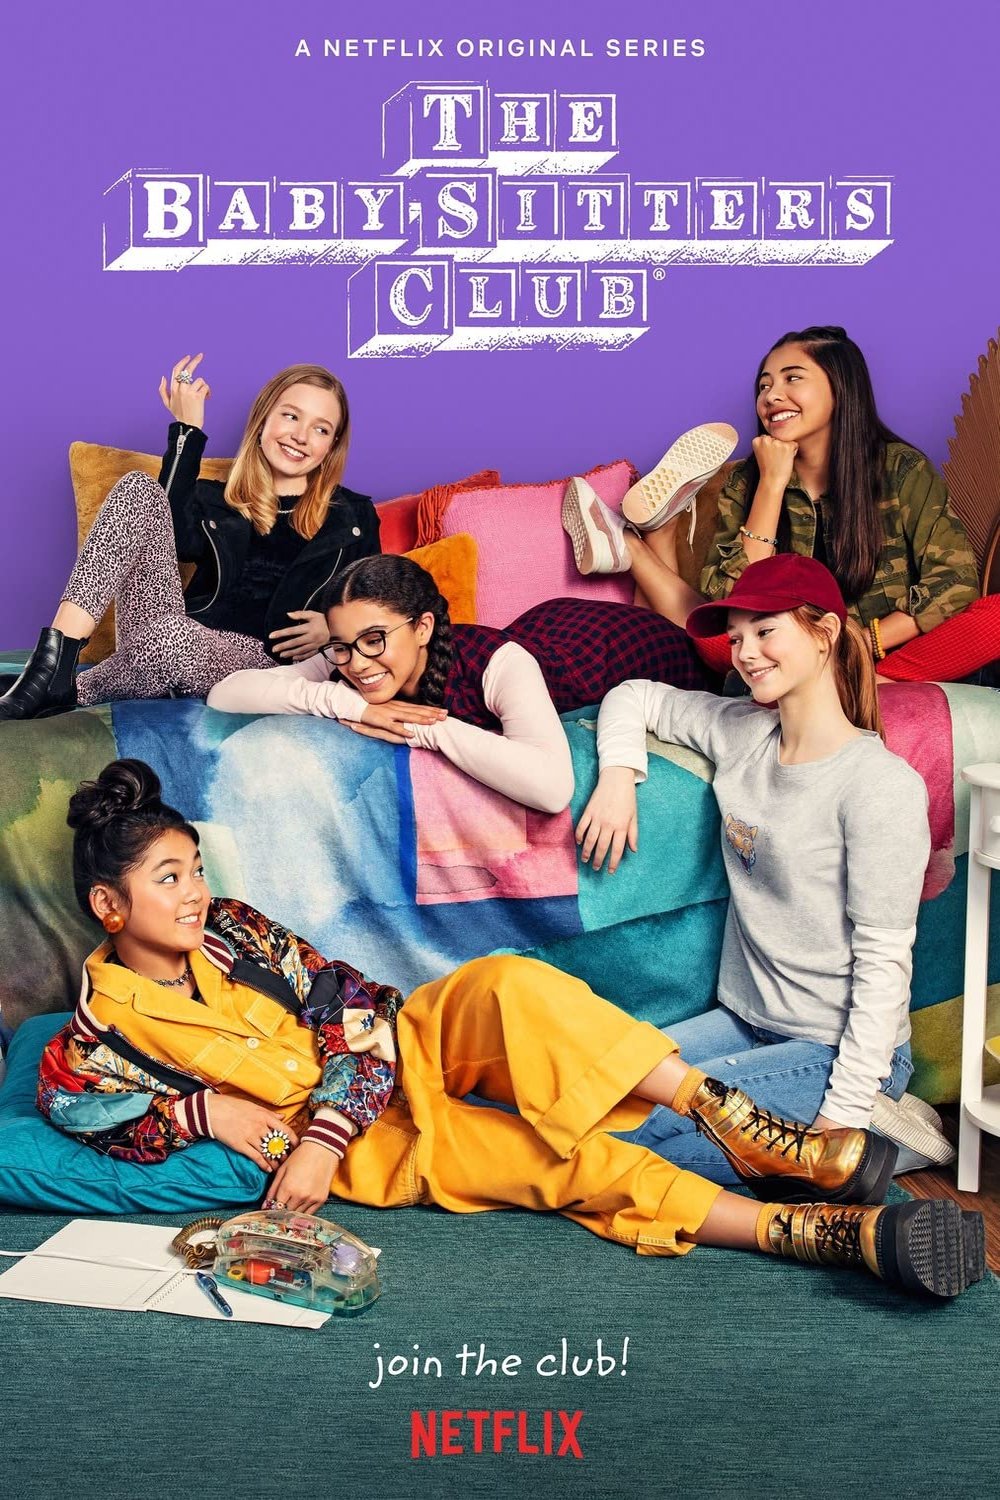 Poster of the movie The Baby-Sitters Club